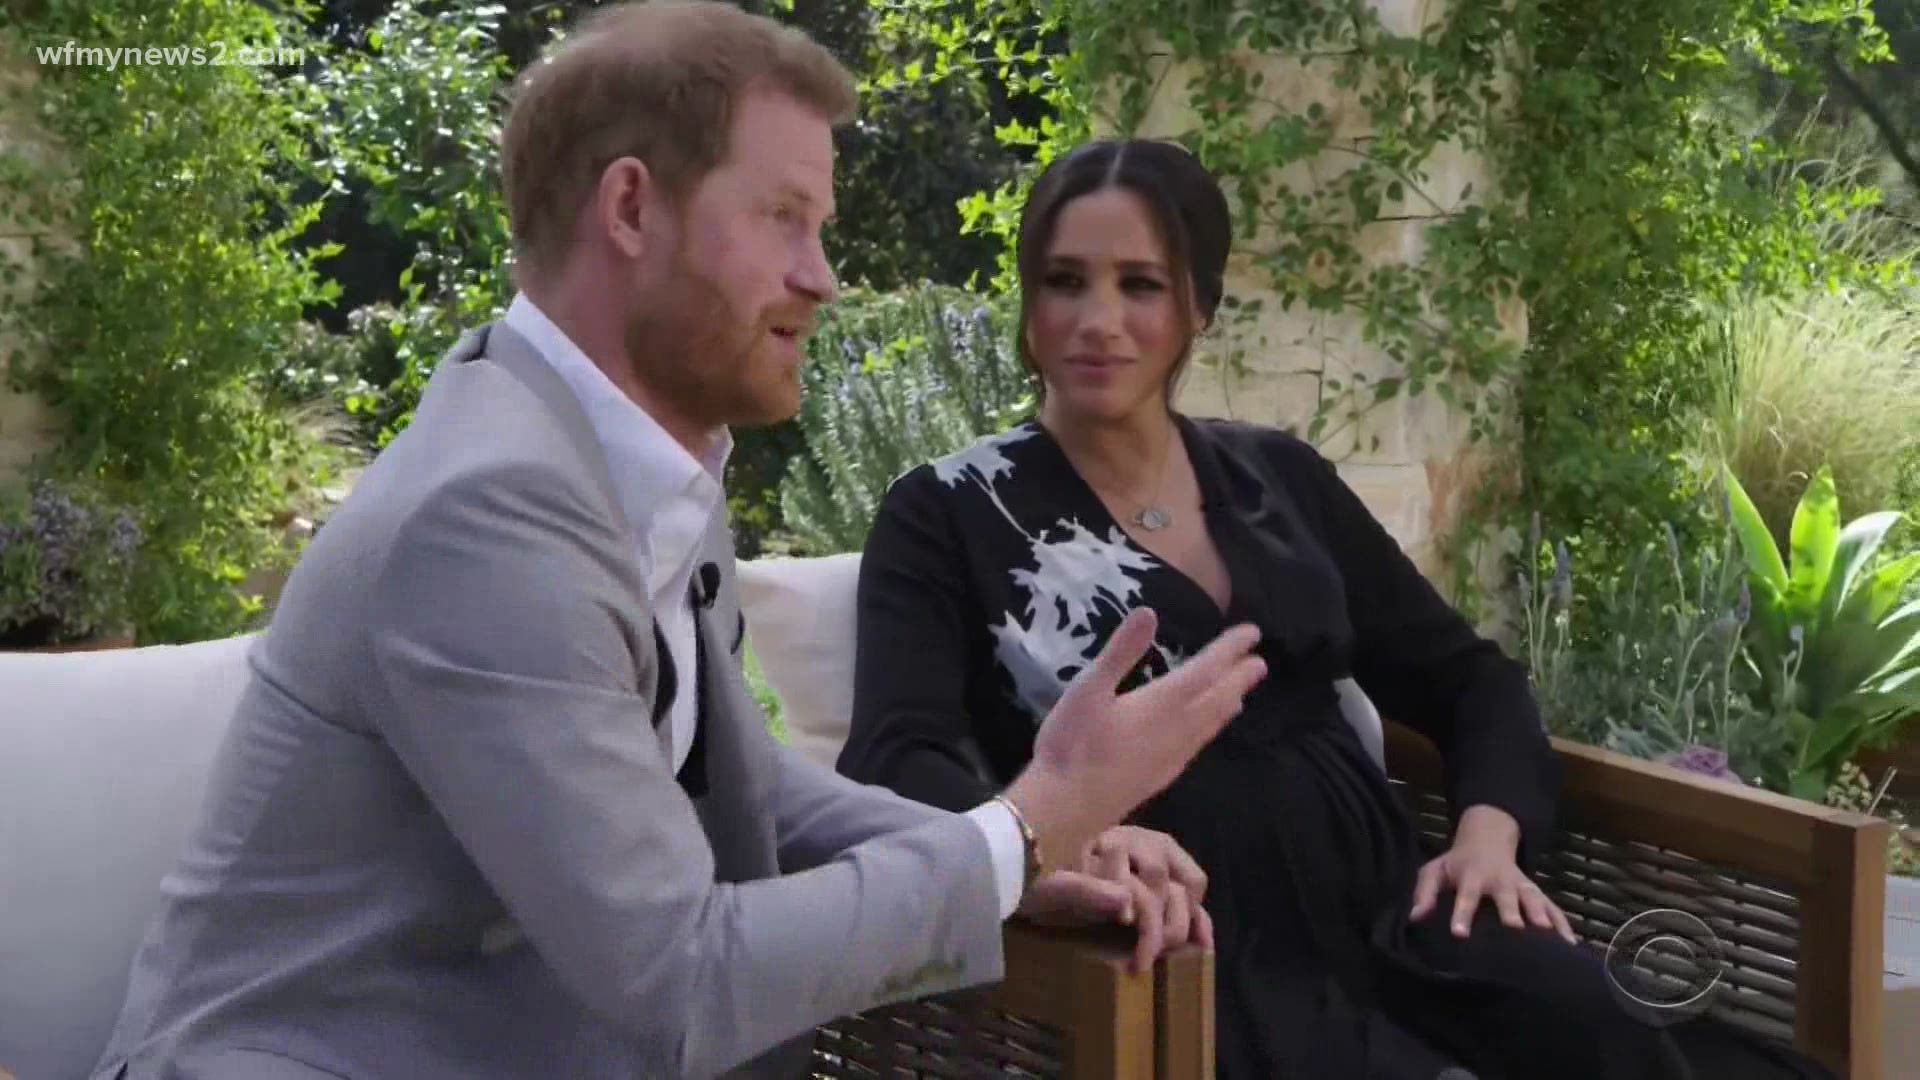 Prince Harry and Meghan Markle dropped eye-opening revelations about their lives in the Royal family.